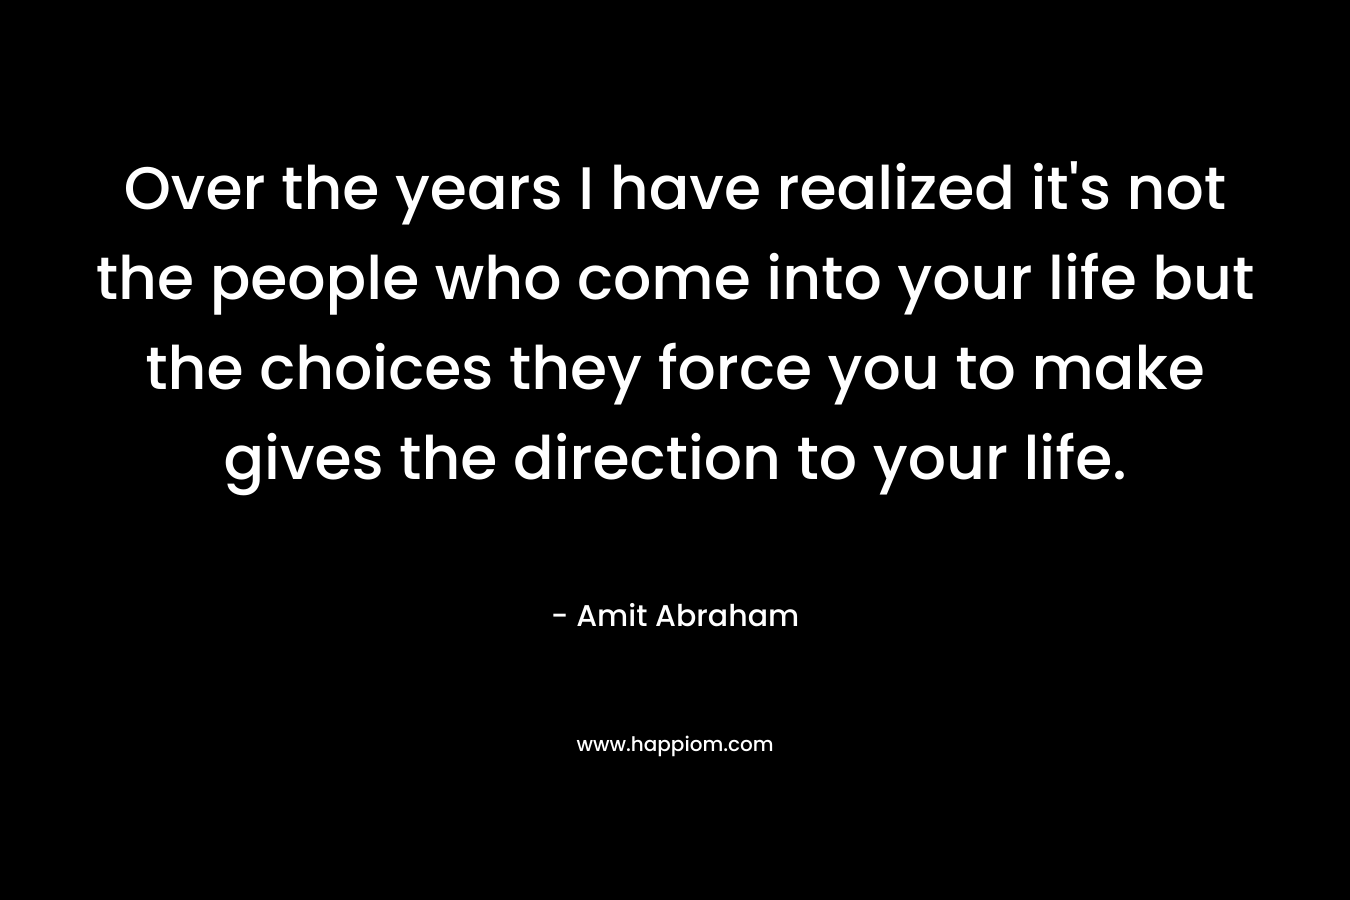 Over the years I have realized it’s not the people who come into your life but the choices they force you to make gives the direction to your life. – Amit Abraham